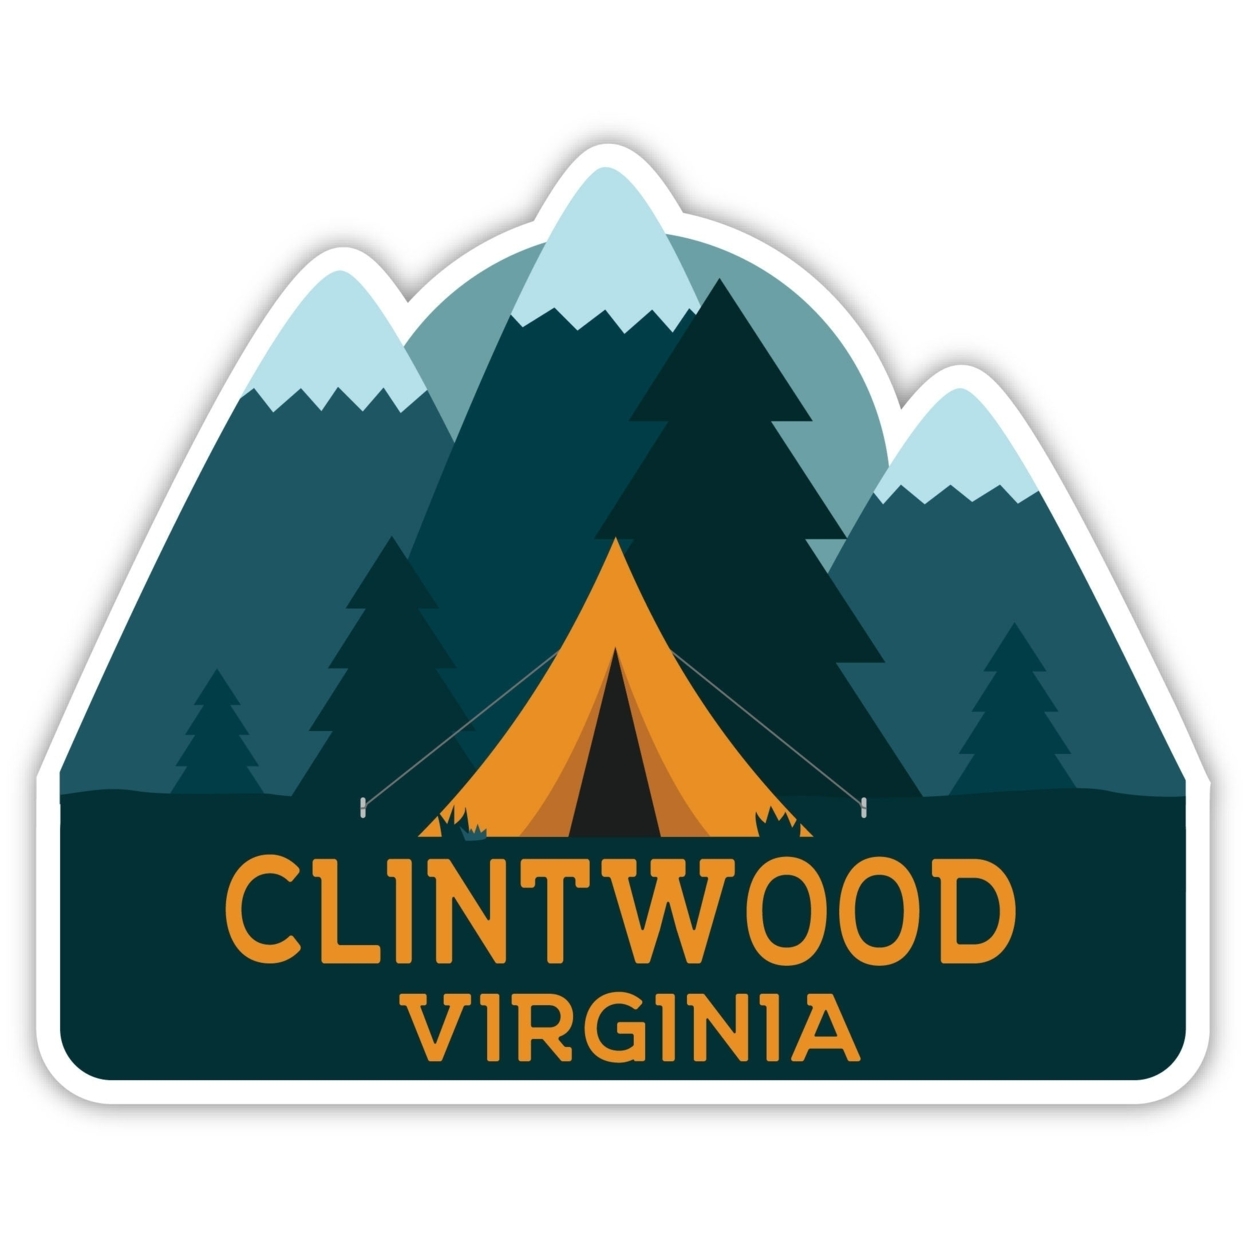 Clintwood Virginia Souvenir Decorative Stickers (Choose Theme And Size) - 4-Pack, 12-Inch, Tent